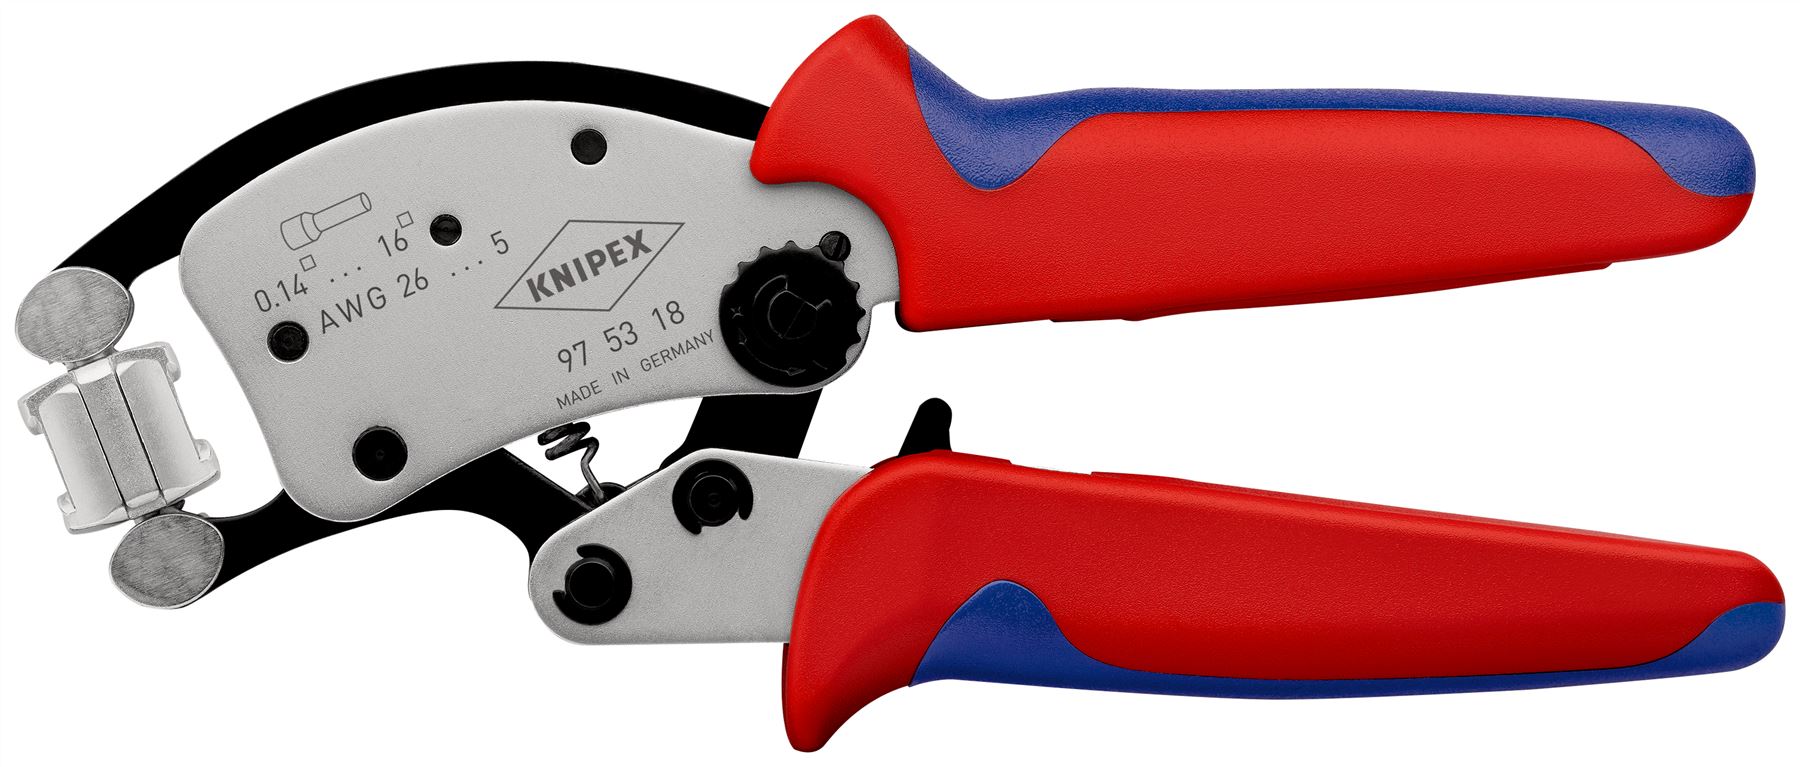 Knipex Twistor 16 Self Adjusting Crimping Pliers for Wire Ferrules with Rotatable Die Head 97 53 18